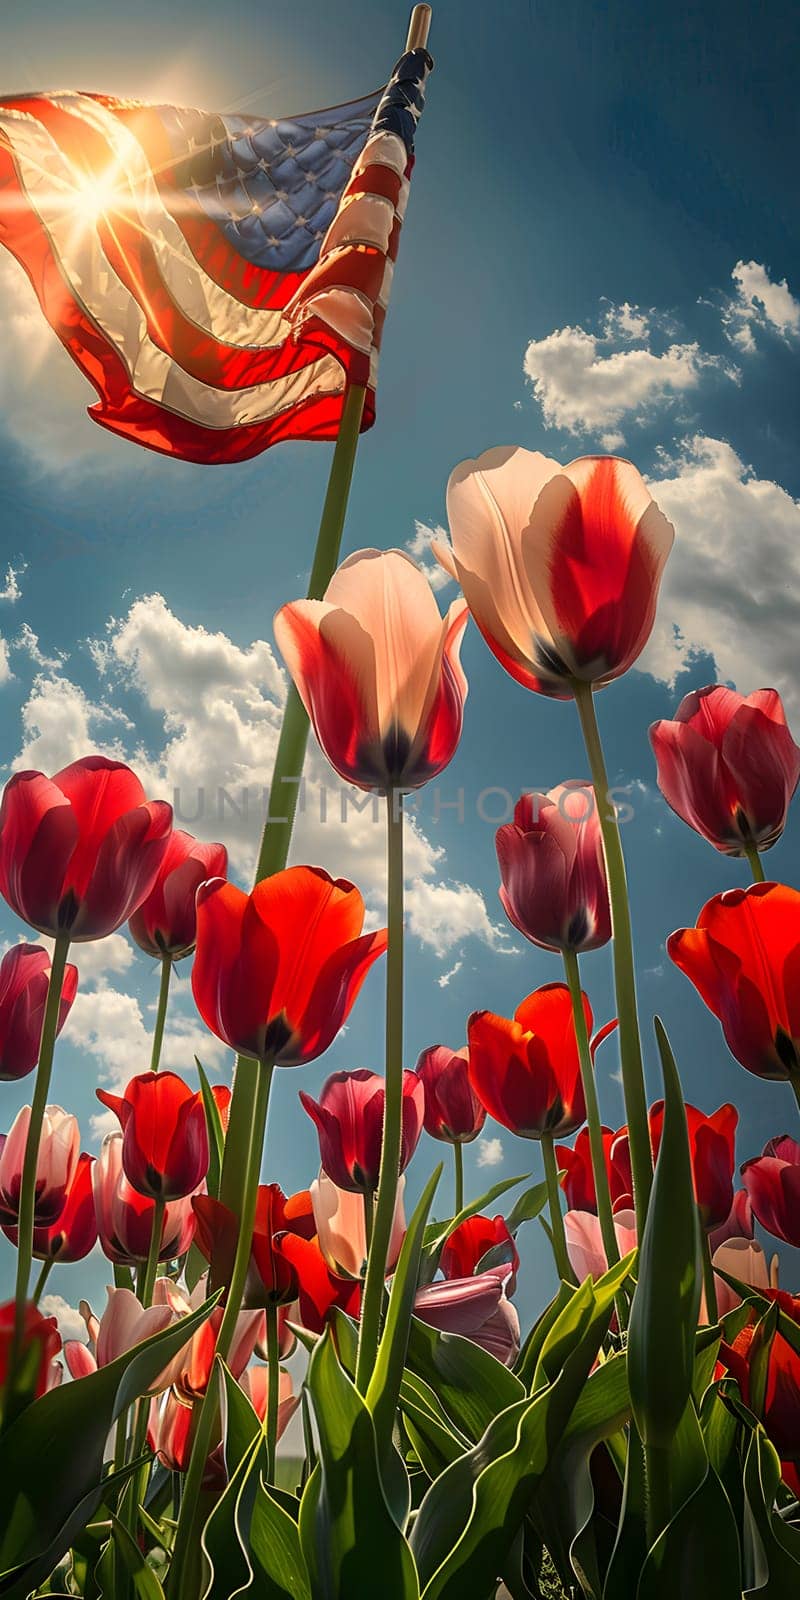 Field of red and white tulips with American flag, under a cloudy sky by Nadtochiy